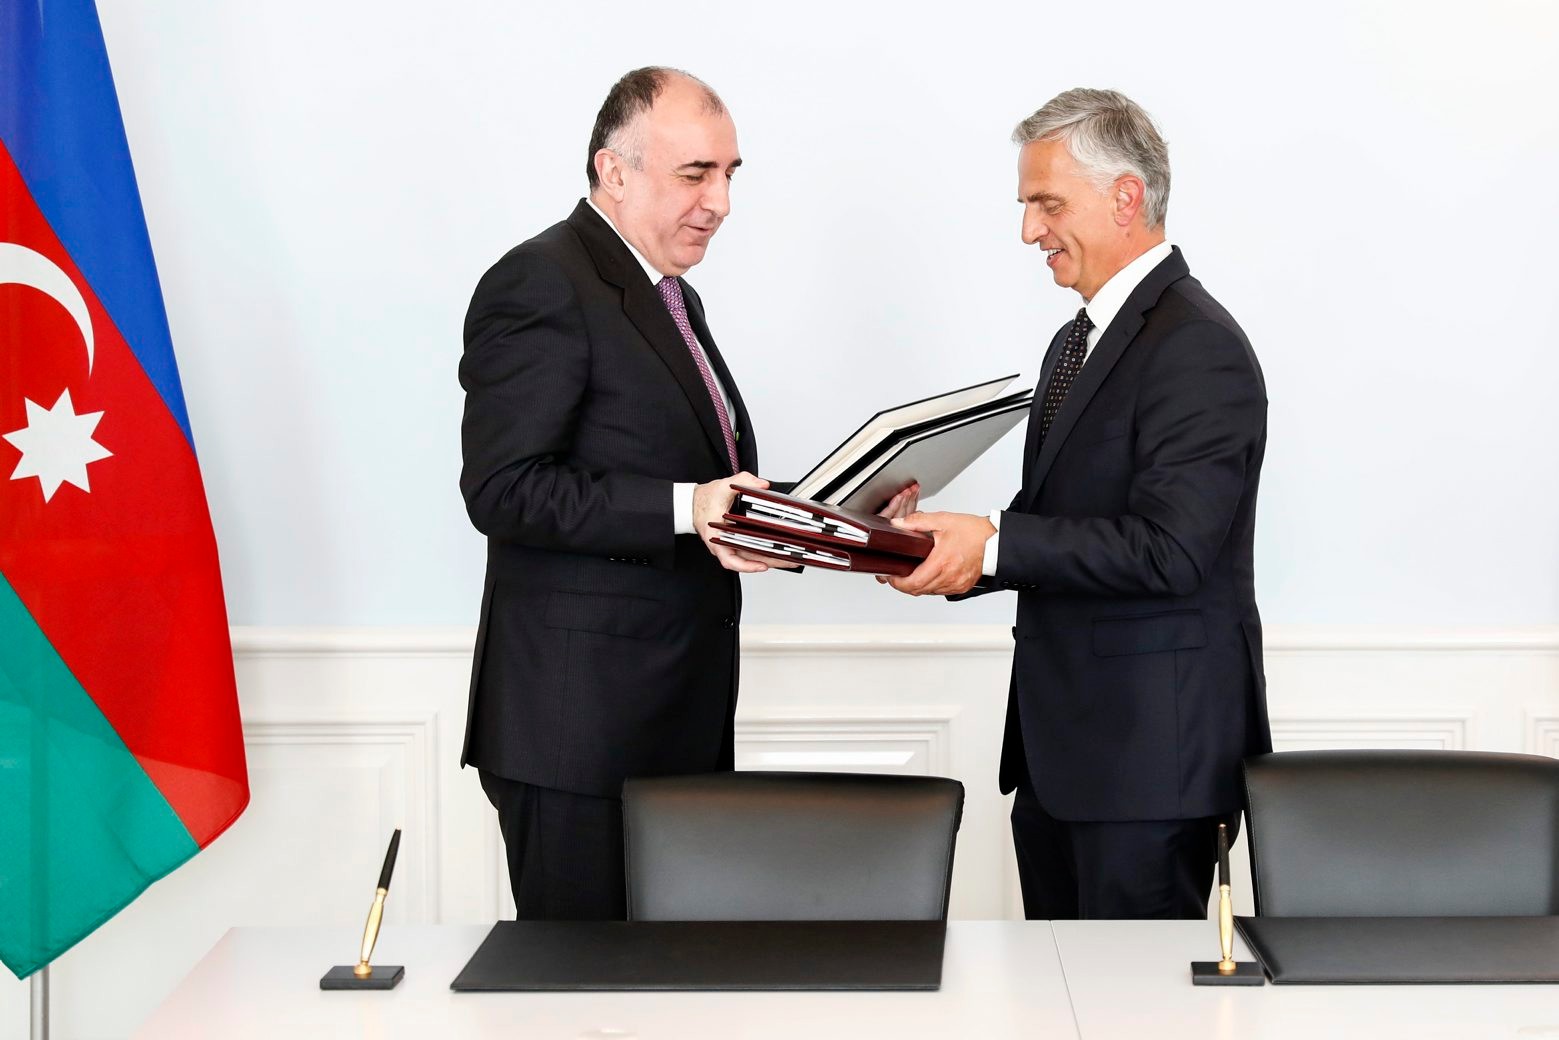 Swiss Foreign Minister Didier Burkhalter, right, and Elmar Mammadyarov, Foreign Minister of Azerbaijan, left, exchange documents after signing an agreement between Switzerland and Azerbaijan on the readmission of persons residing without authorisation and an agreement on the facilitation of the issuance of visas, during Mammadyarov's official visit in Bern, Switzerland, Monday, October 10, 2016.(KEYSTONE/Peter Klaunzer) SCHWEIZ BESUCH ASERBAIDSCHAN